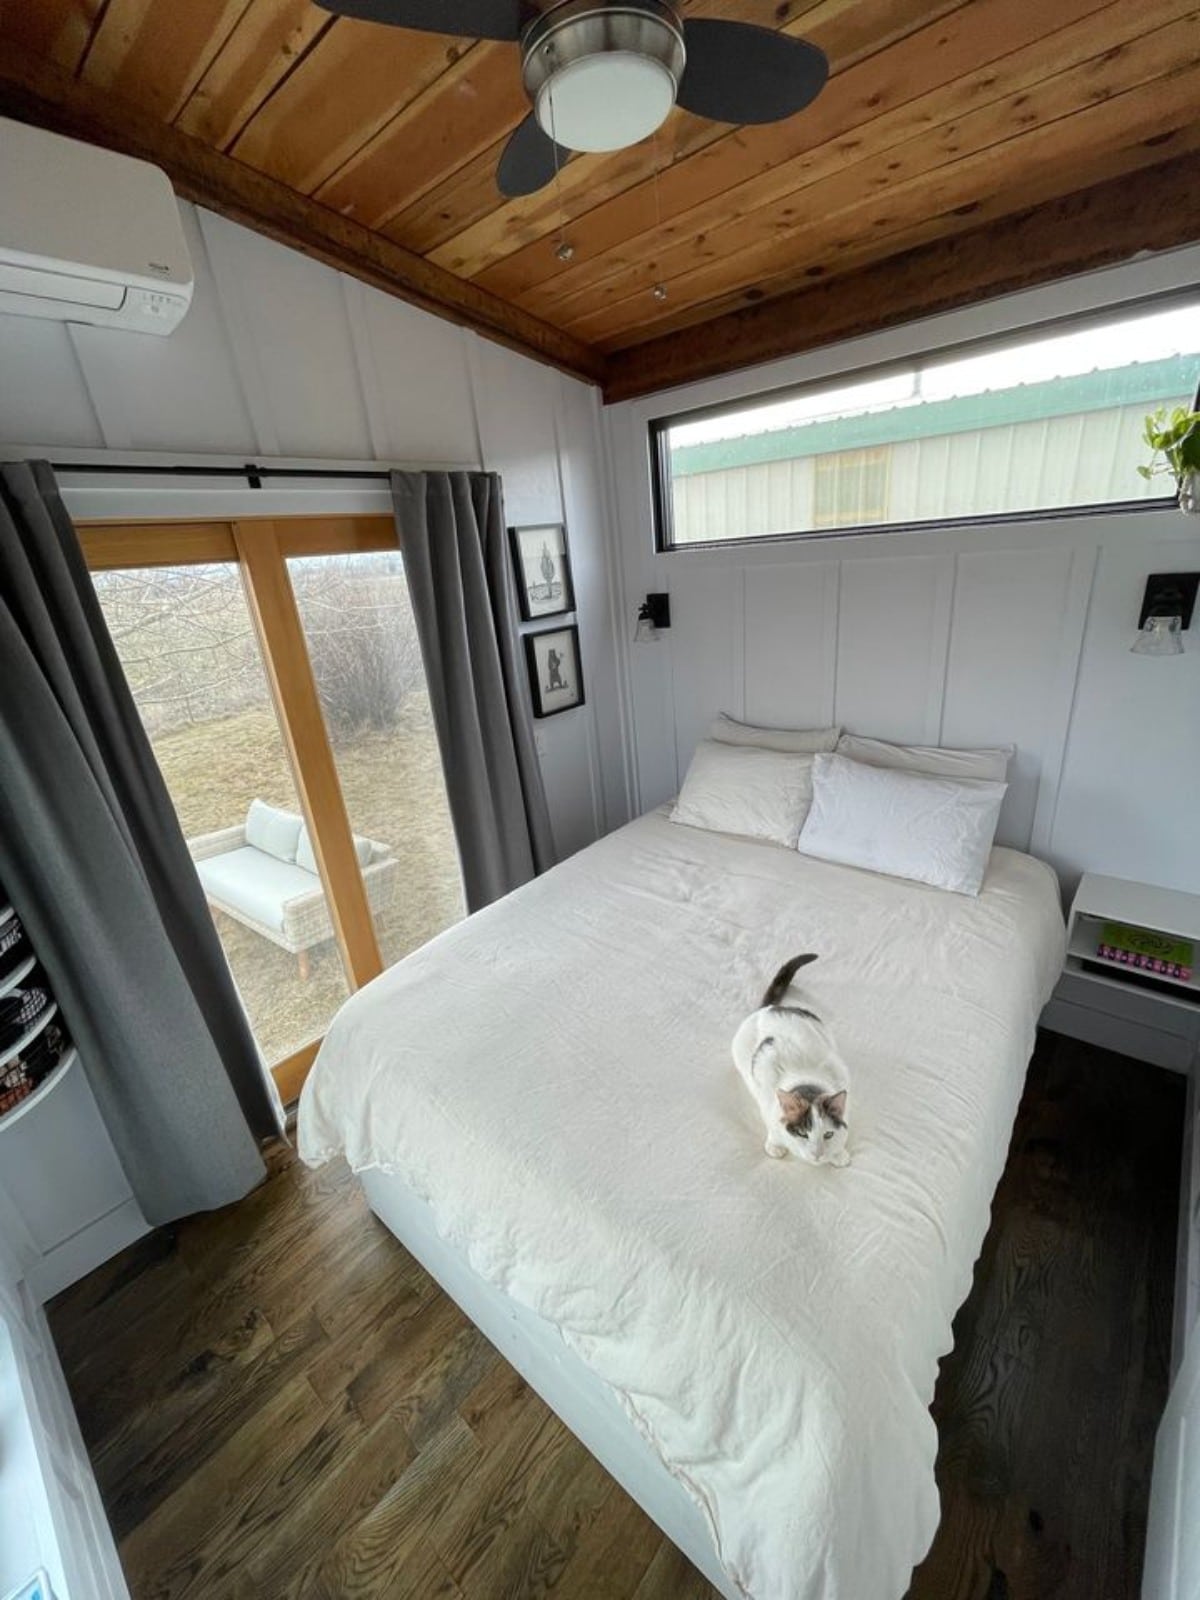 Bedroom of 30’ Tiny House on Wheels has classy custom made queen bed, a side table, shelves, an air condition unit with huge glass window and back door